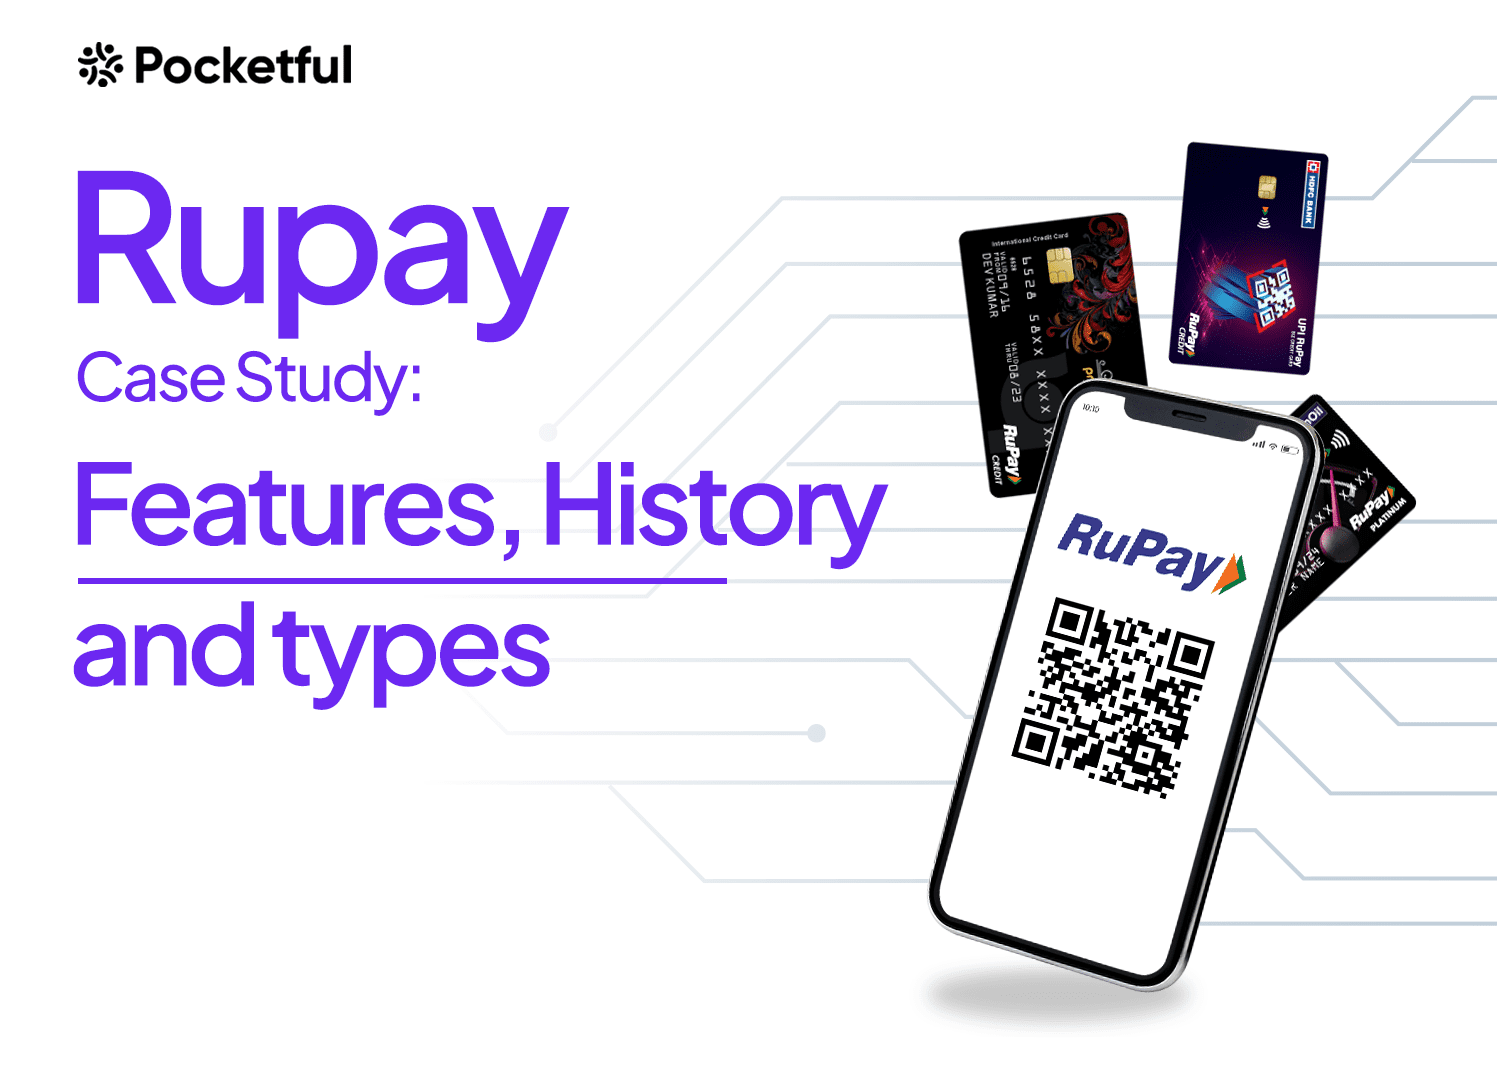 Rupay Case Study: Features, Timeline, Types, Growth, and Comparison